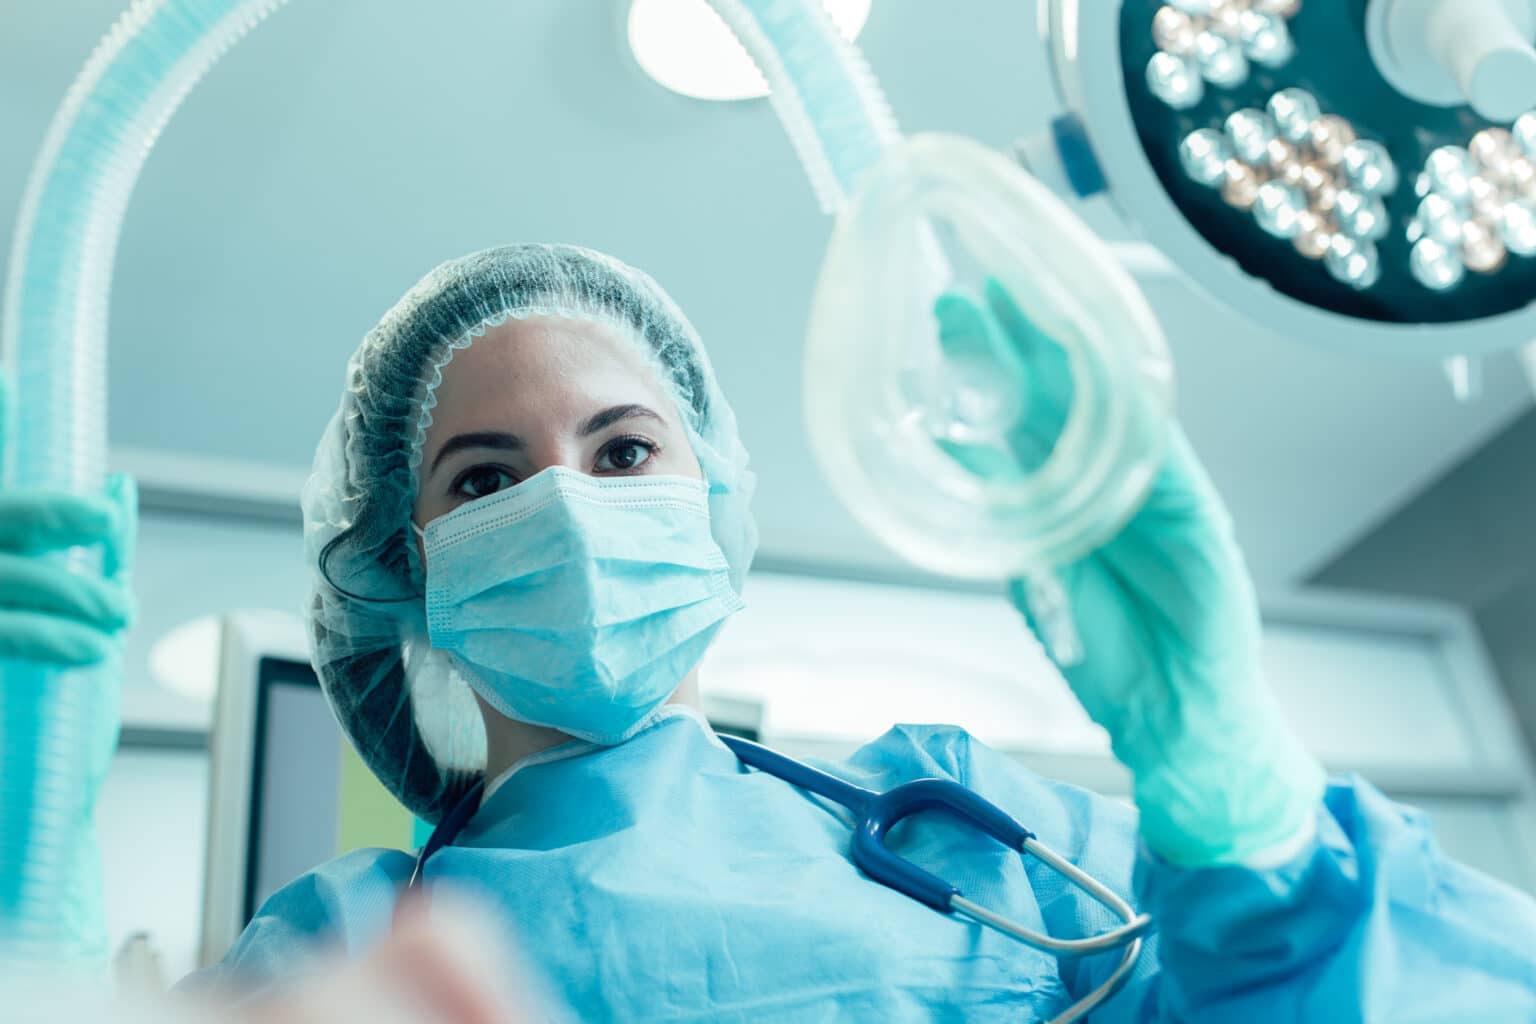 Anesthesiologist jobs in the US